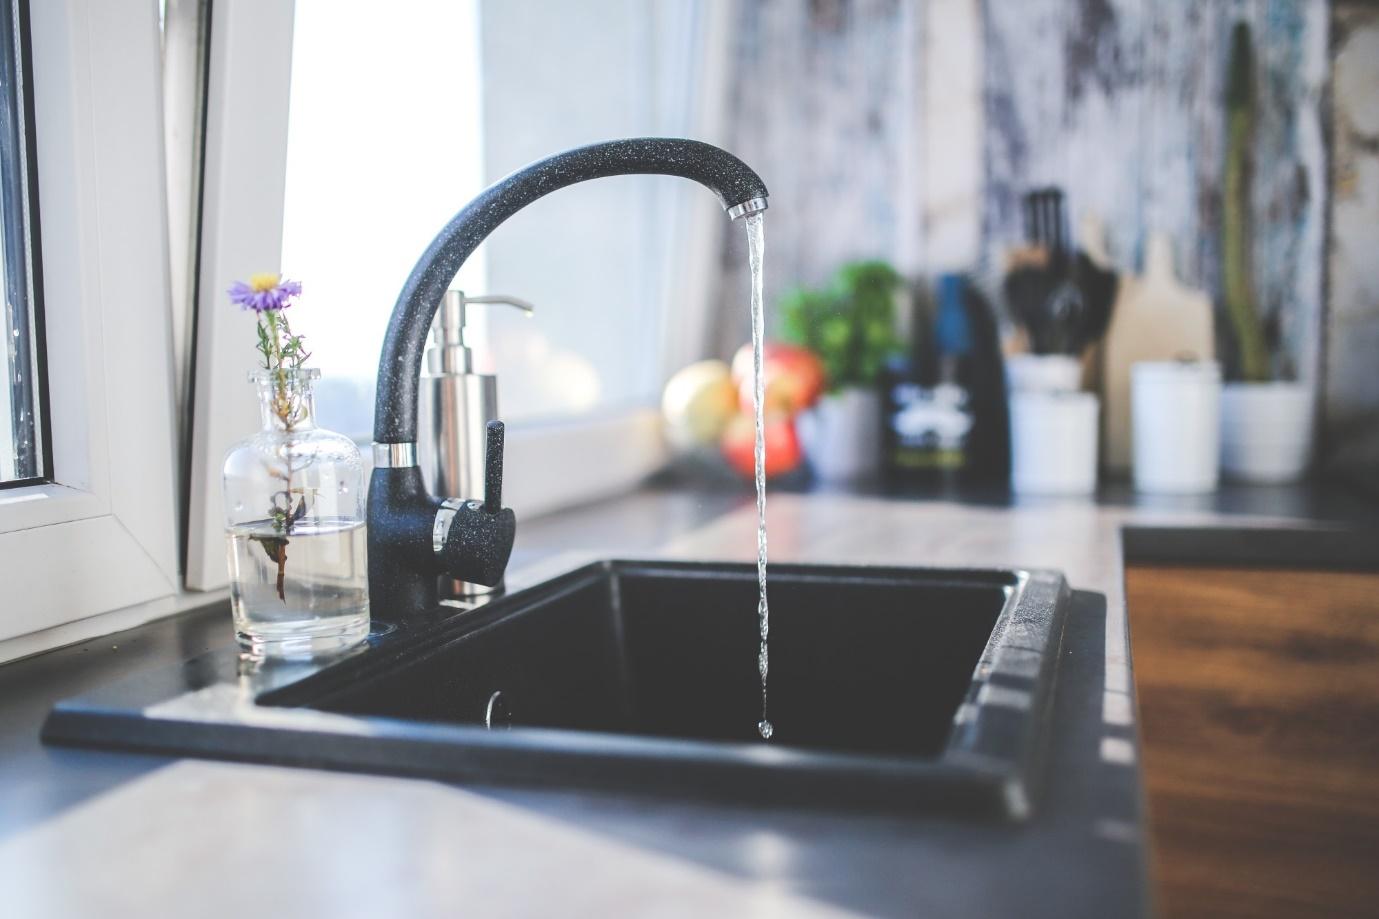 What Are Magnetic Water Softeners and Do They Actually Work?